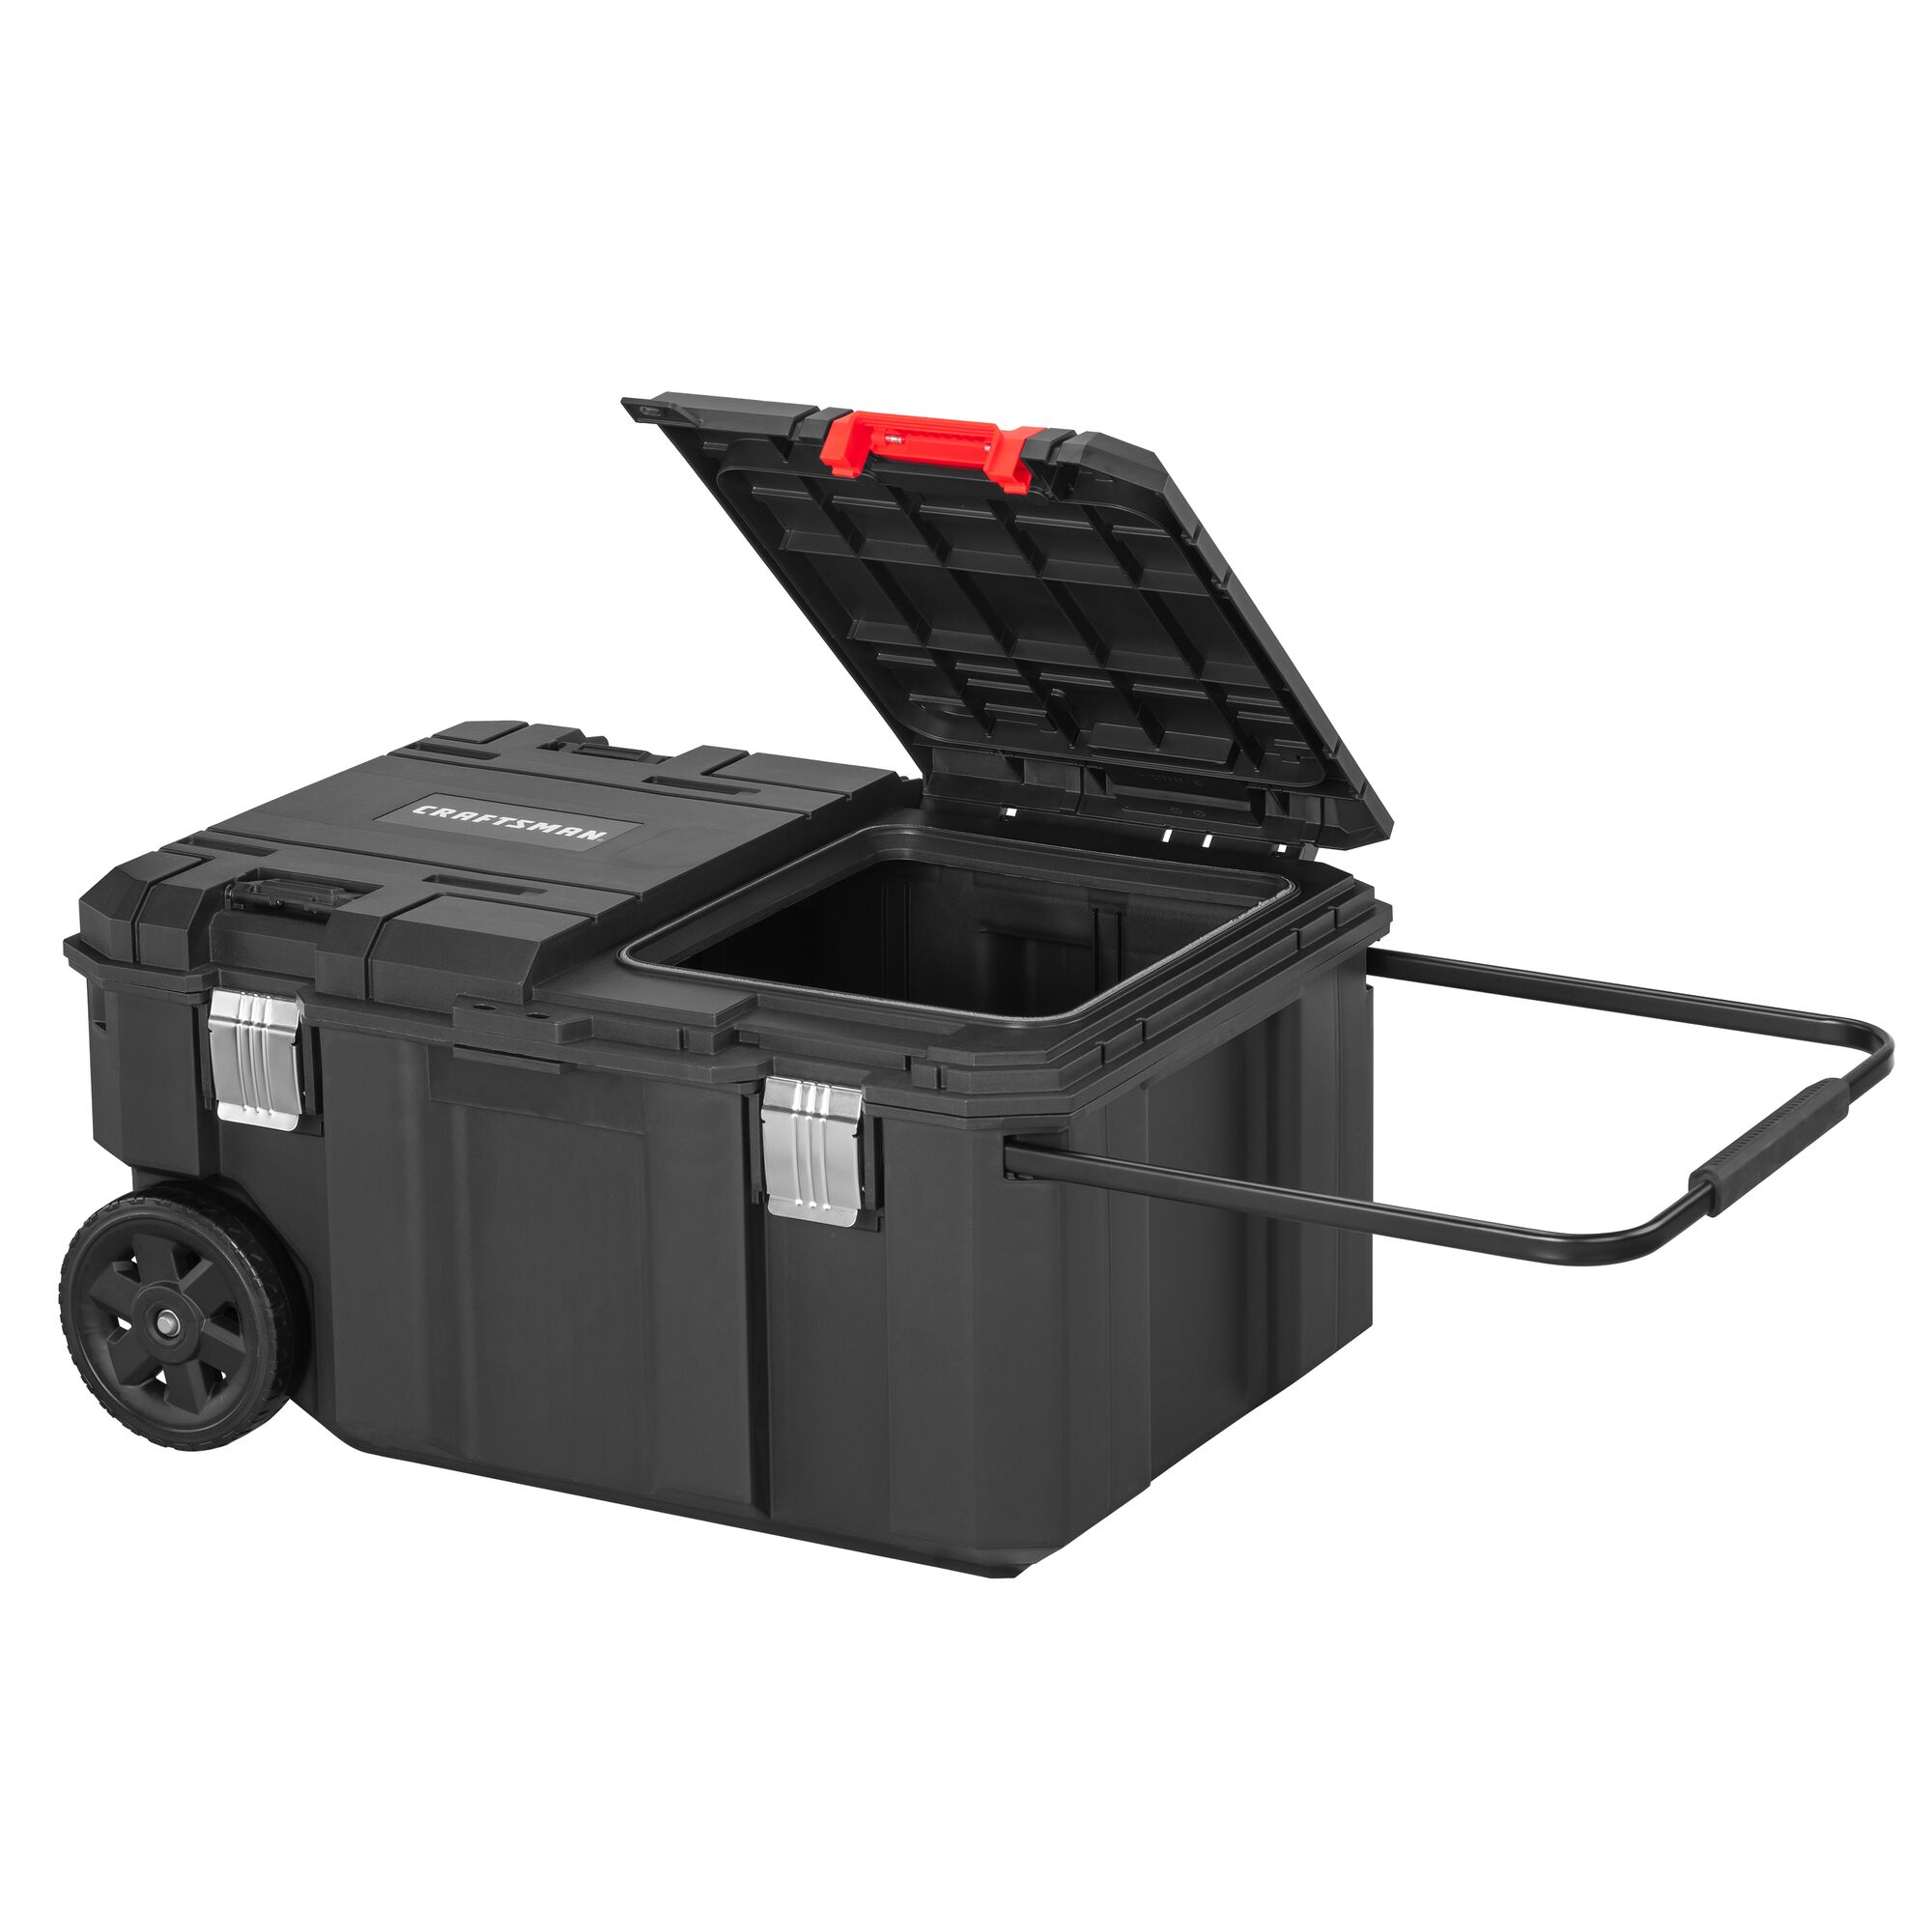 CRAFTSMAN 25-in Multiple Colors/Finishes Plastic Lockable Tool Box